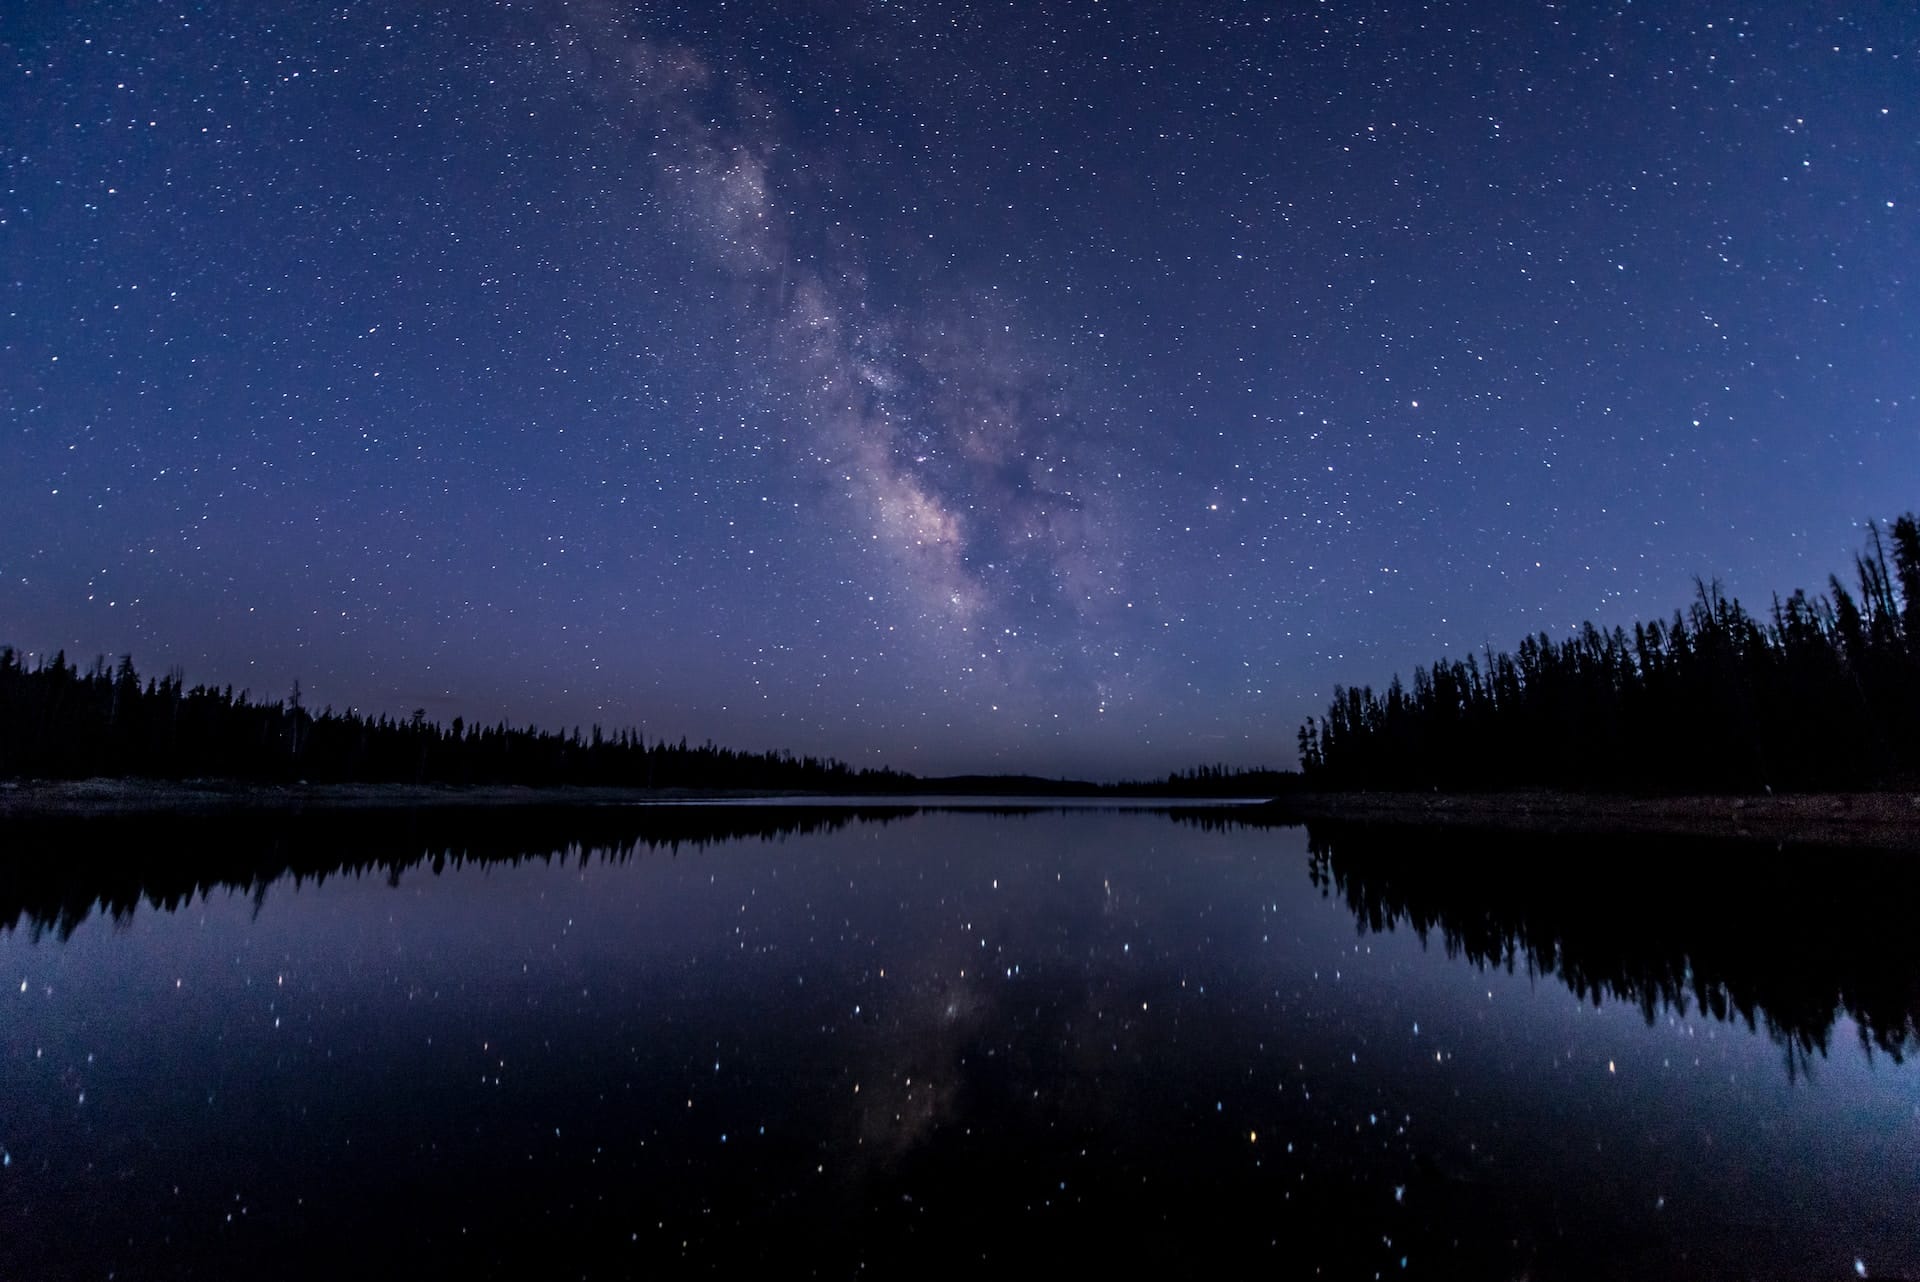 A breathtaking view of the starry night sky and the Milky Way galaxy over a serene, lost lake in the Uinta Mountains. The celestial display above the tranquil waters creates a majestic and awe-inspiring scene, symbolizing the vast and unexplored depths of the subconscious mind and the journey of self-discovery.